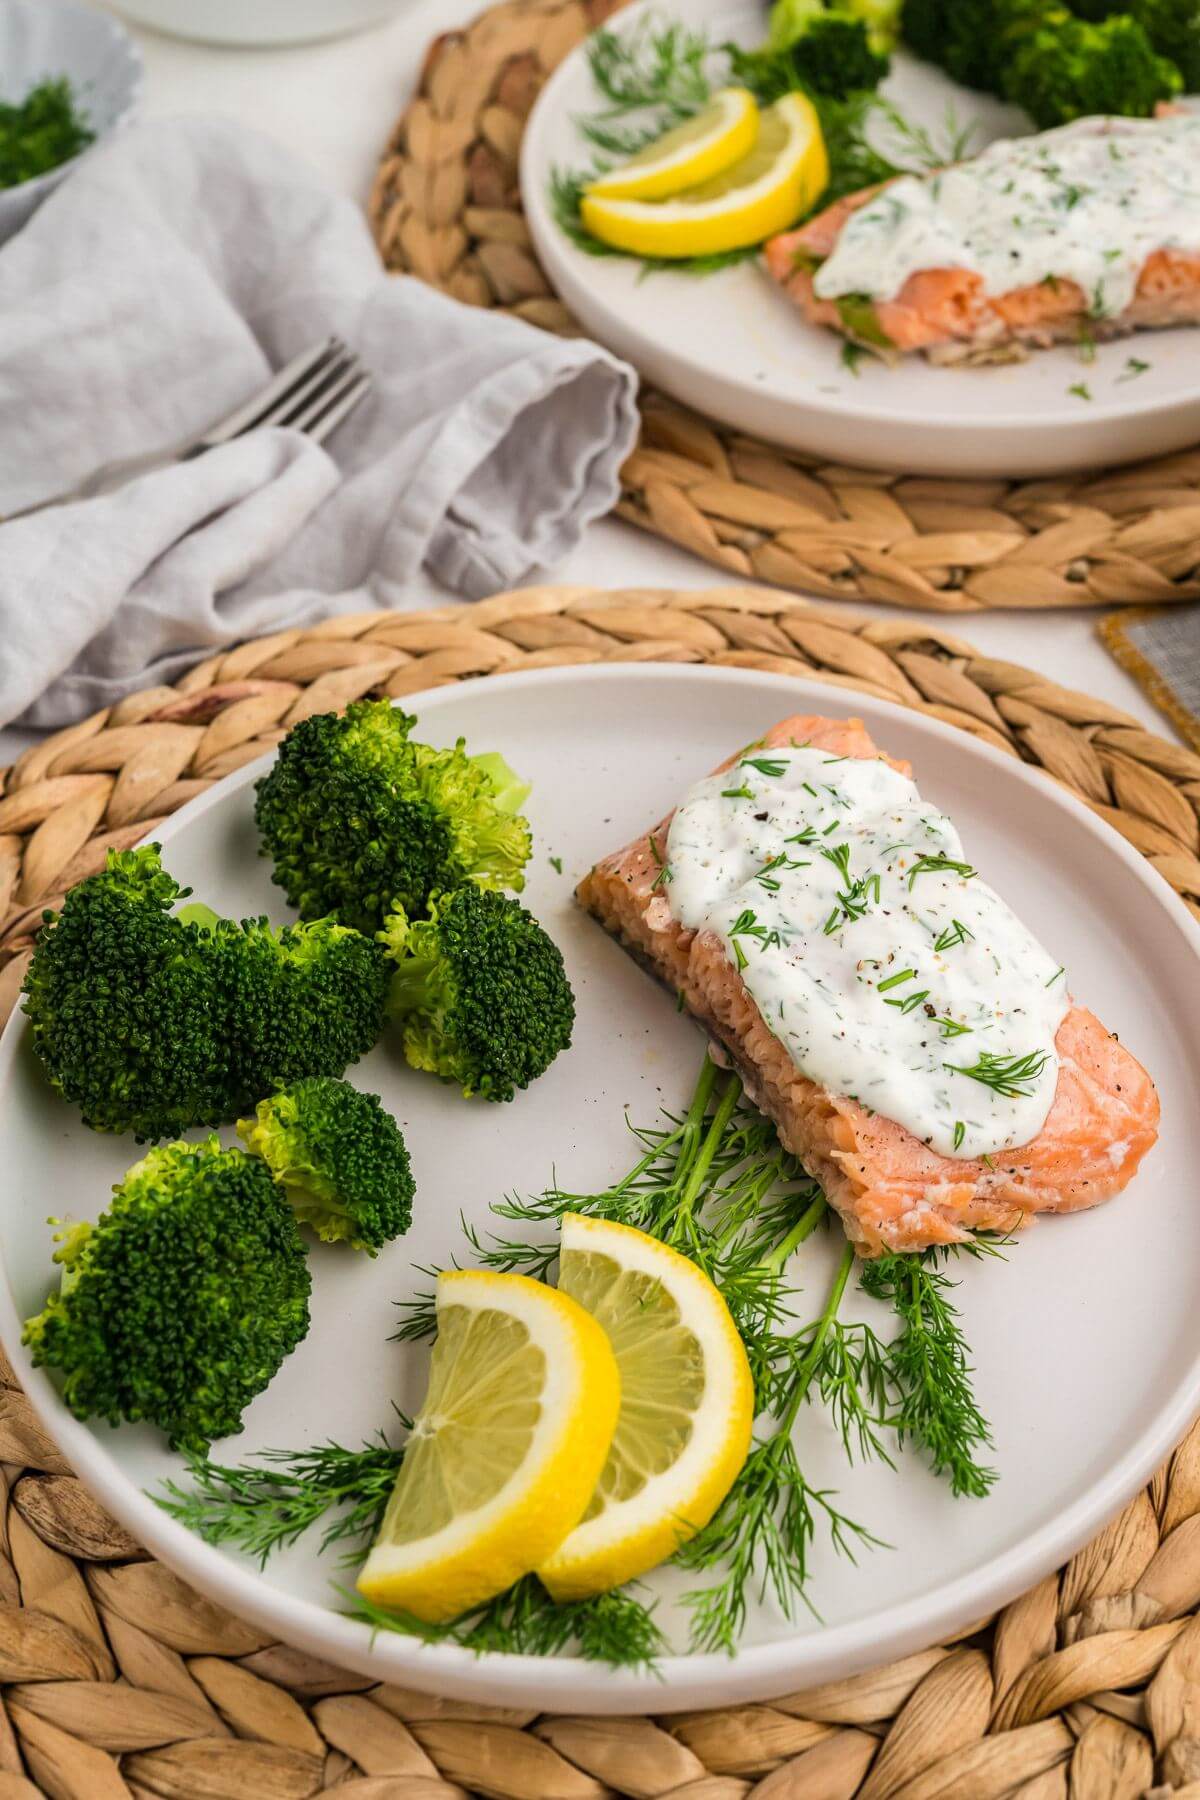 Two plates filled with broccoli, dill, lemon, and salmon with sauce are on a table.